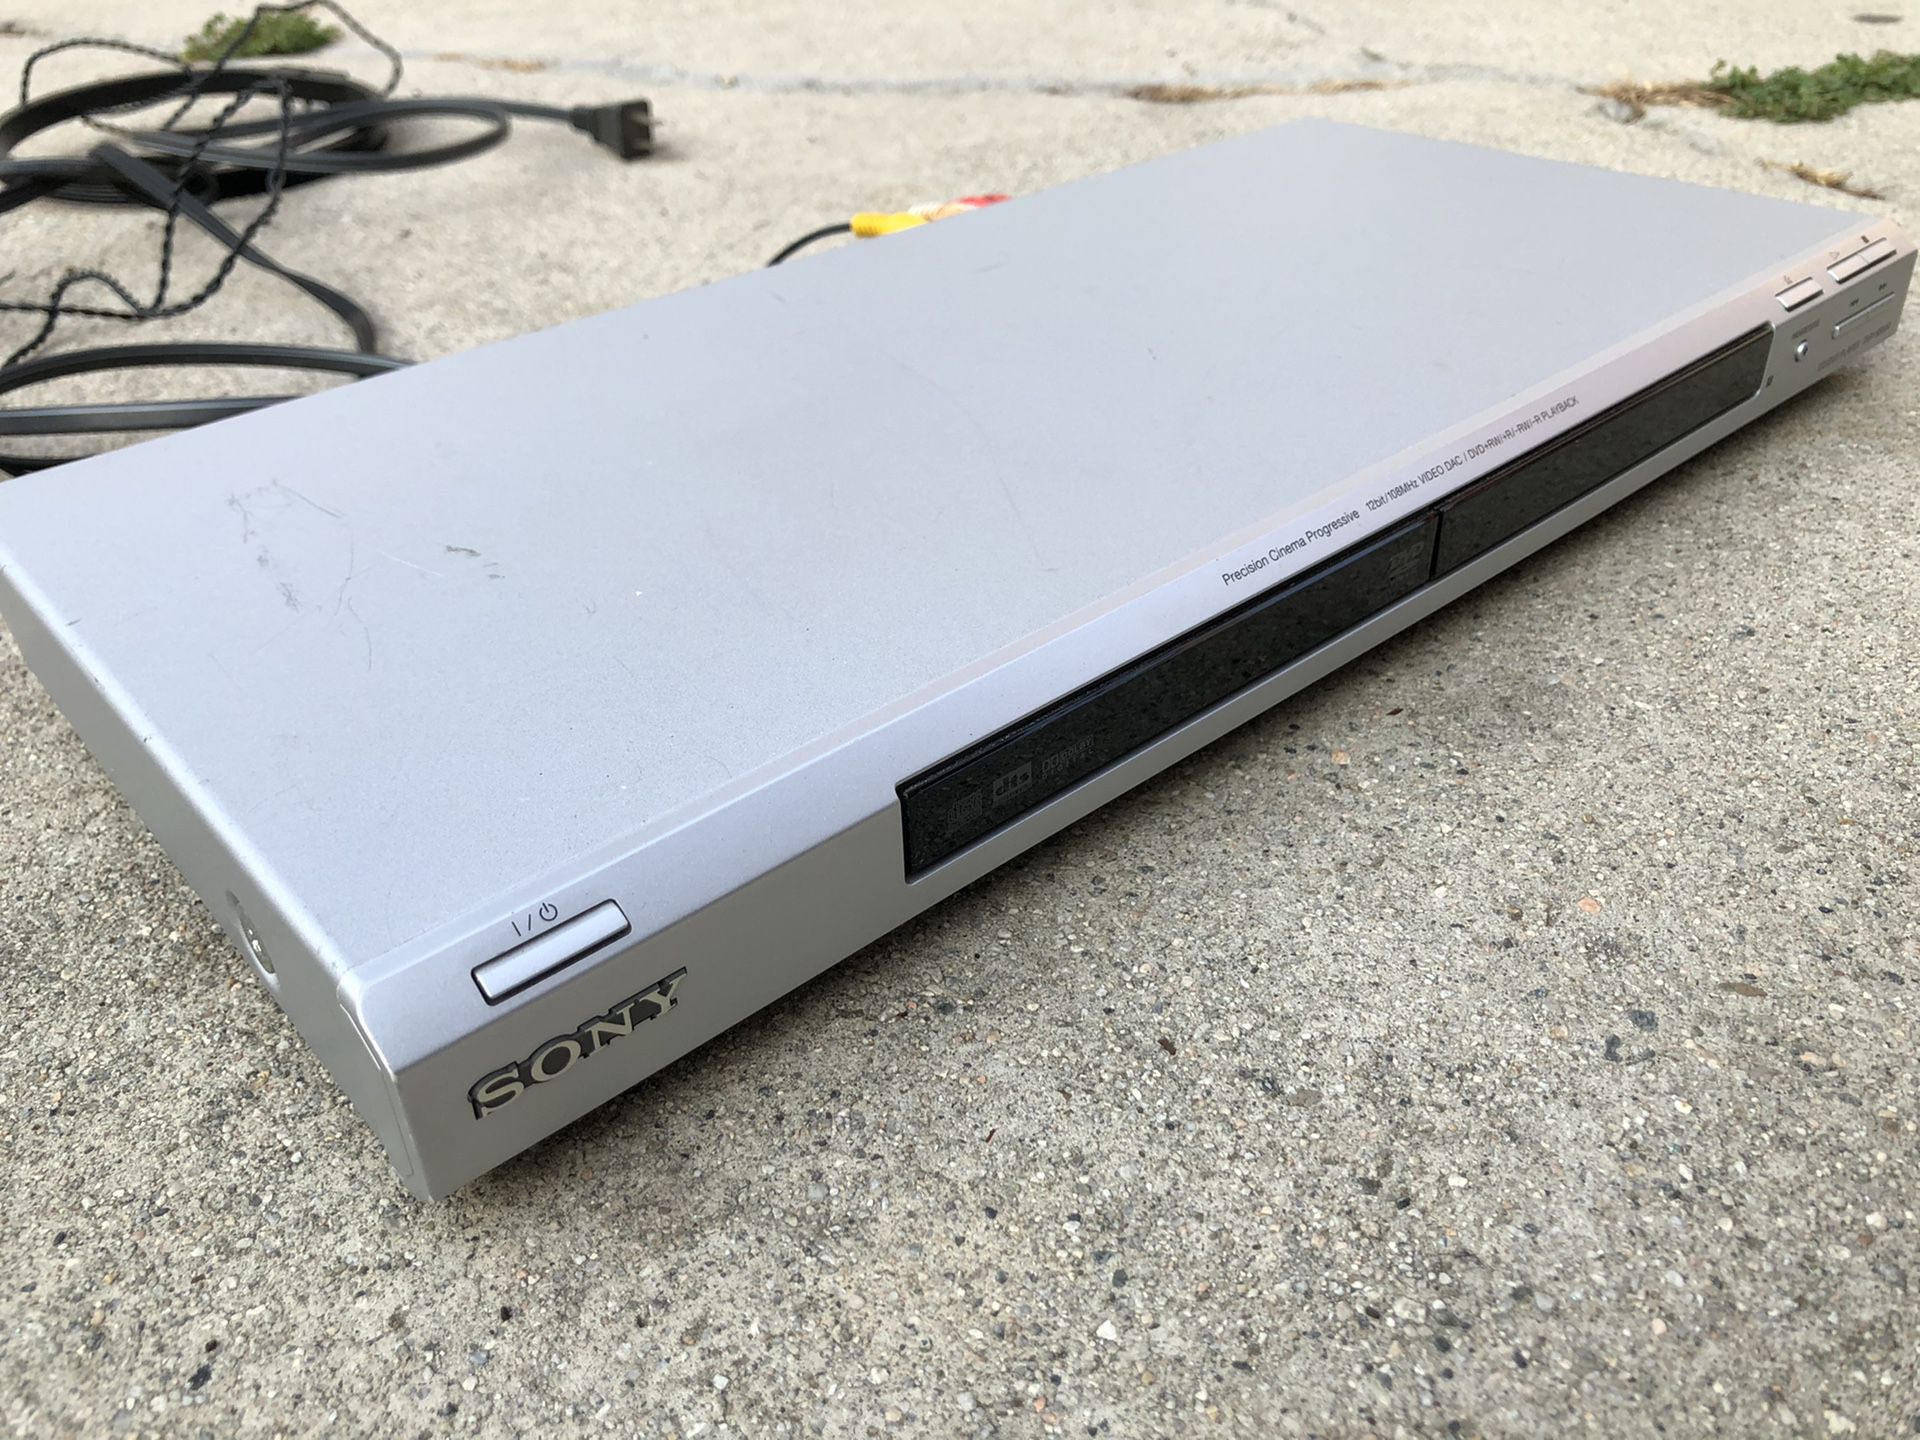 Sony DVD / CD player in good working condition ready to use